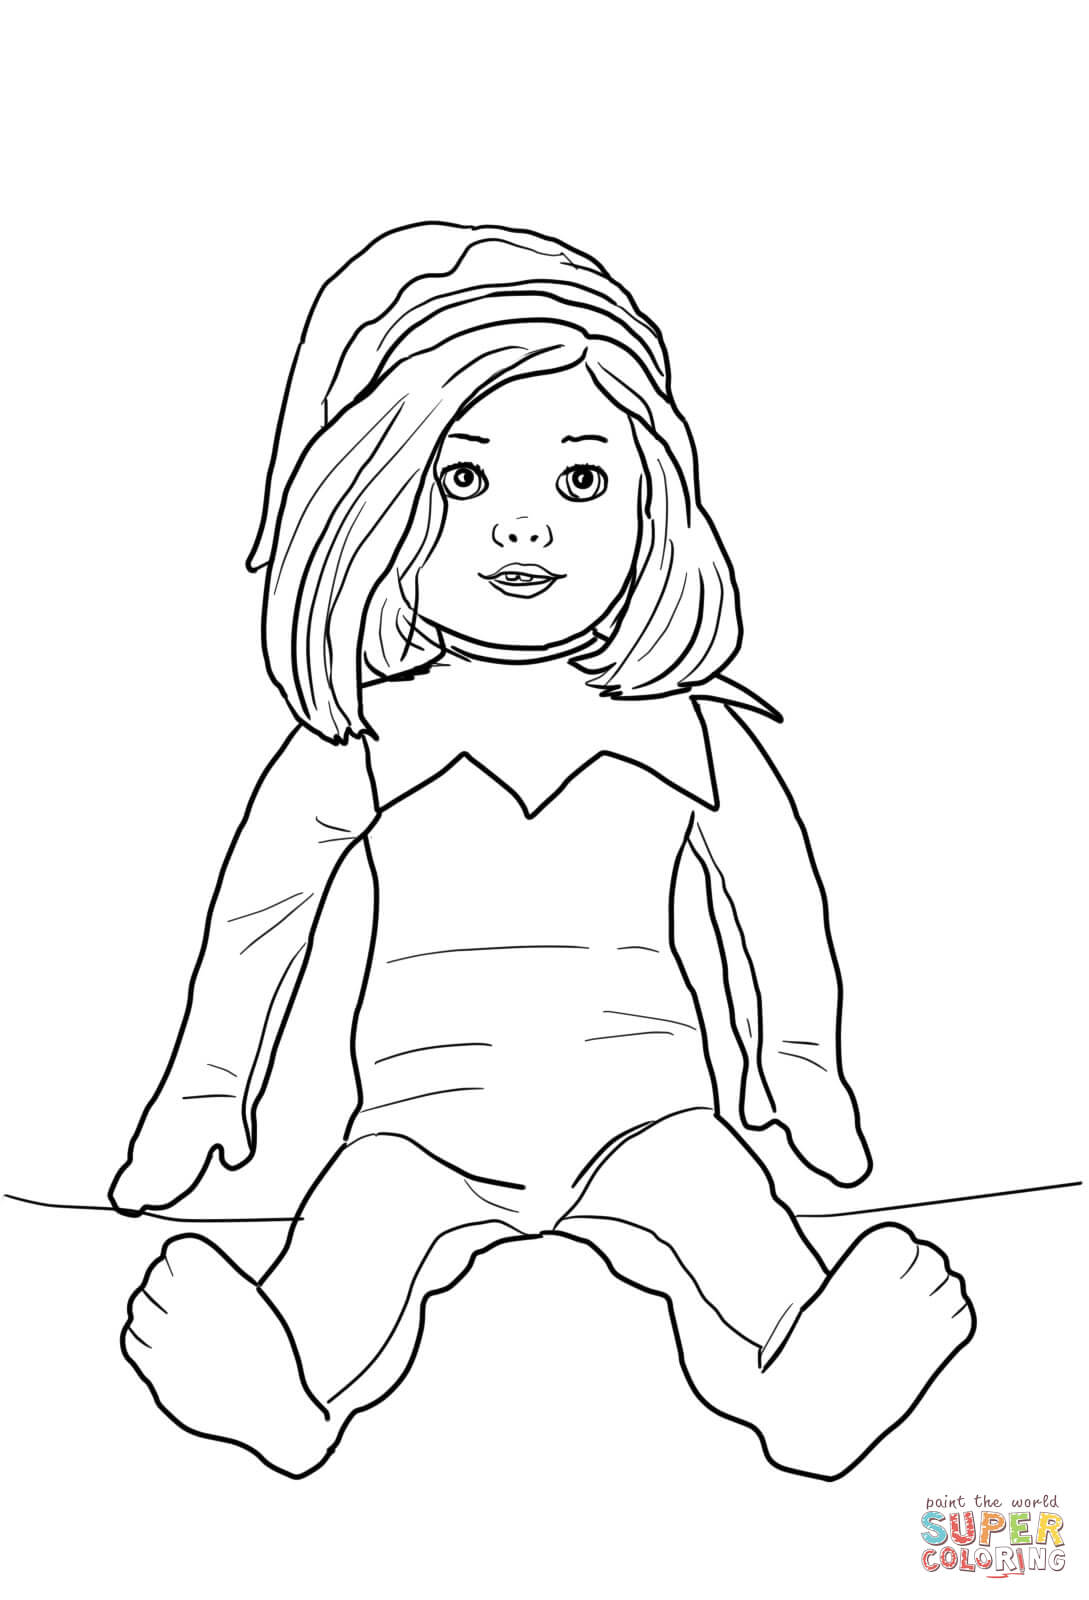 13 Pics of Real Elf On The Shelf Coloring Pages - Elf On the Shelf ...